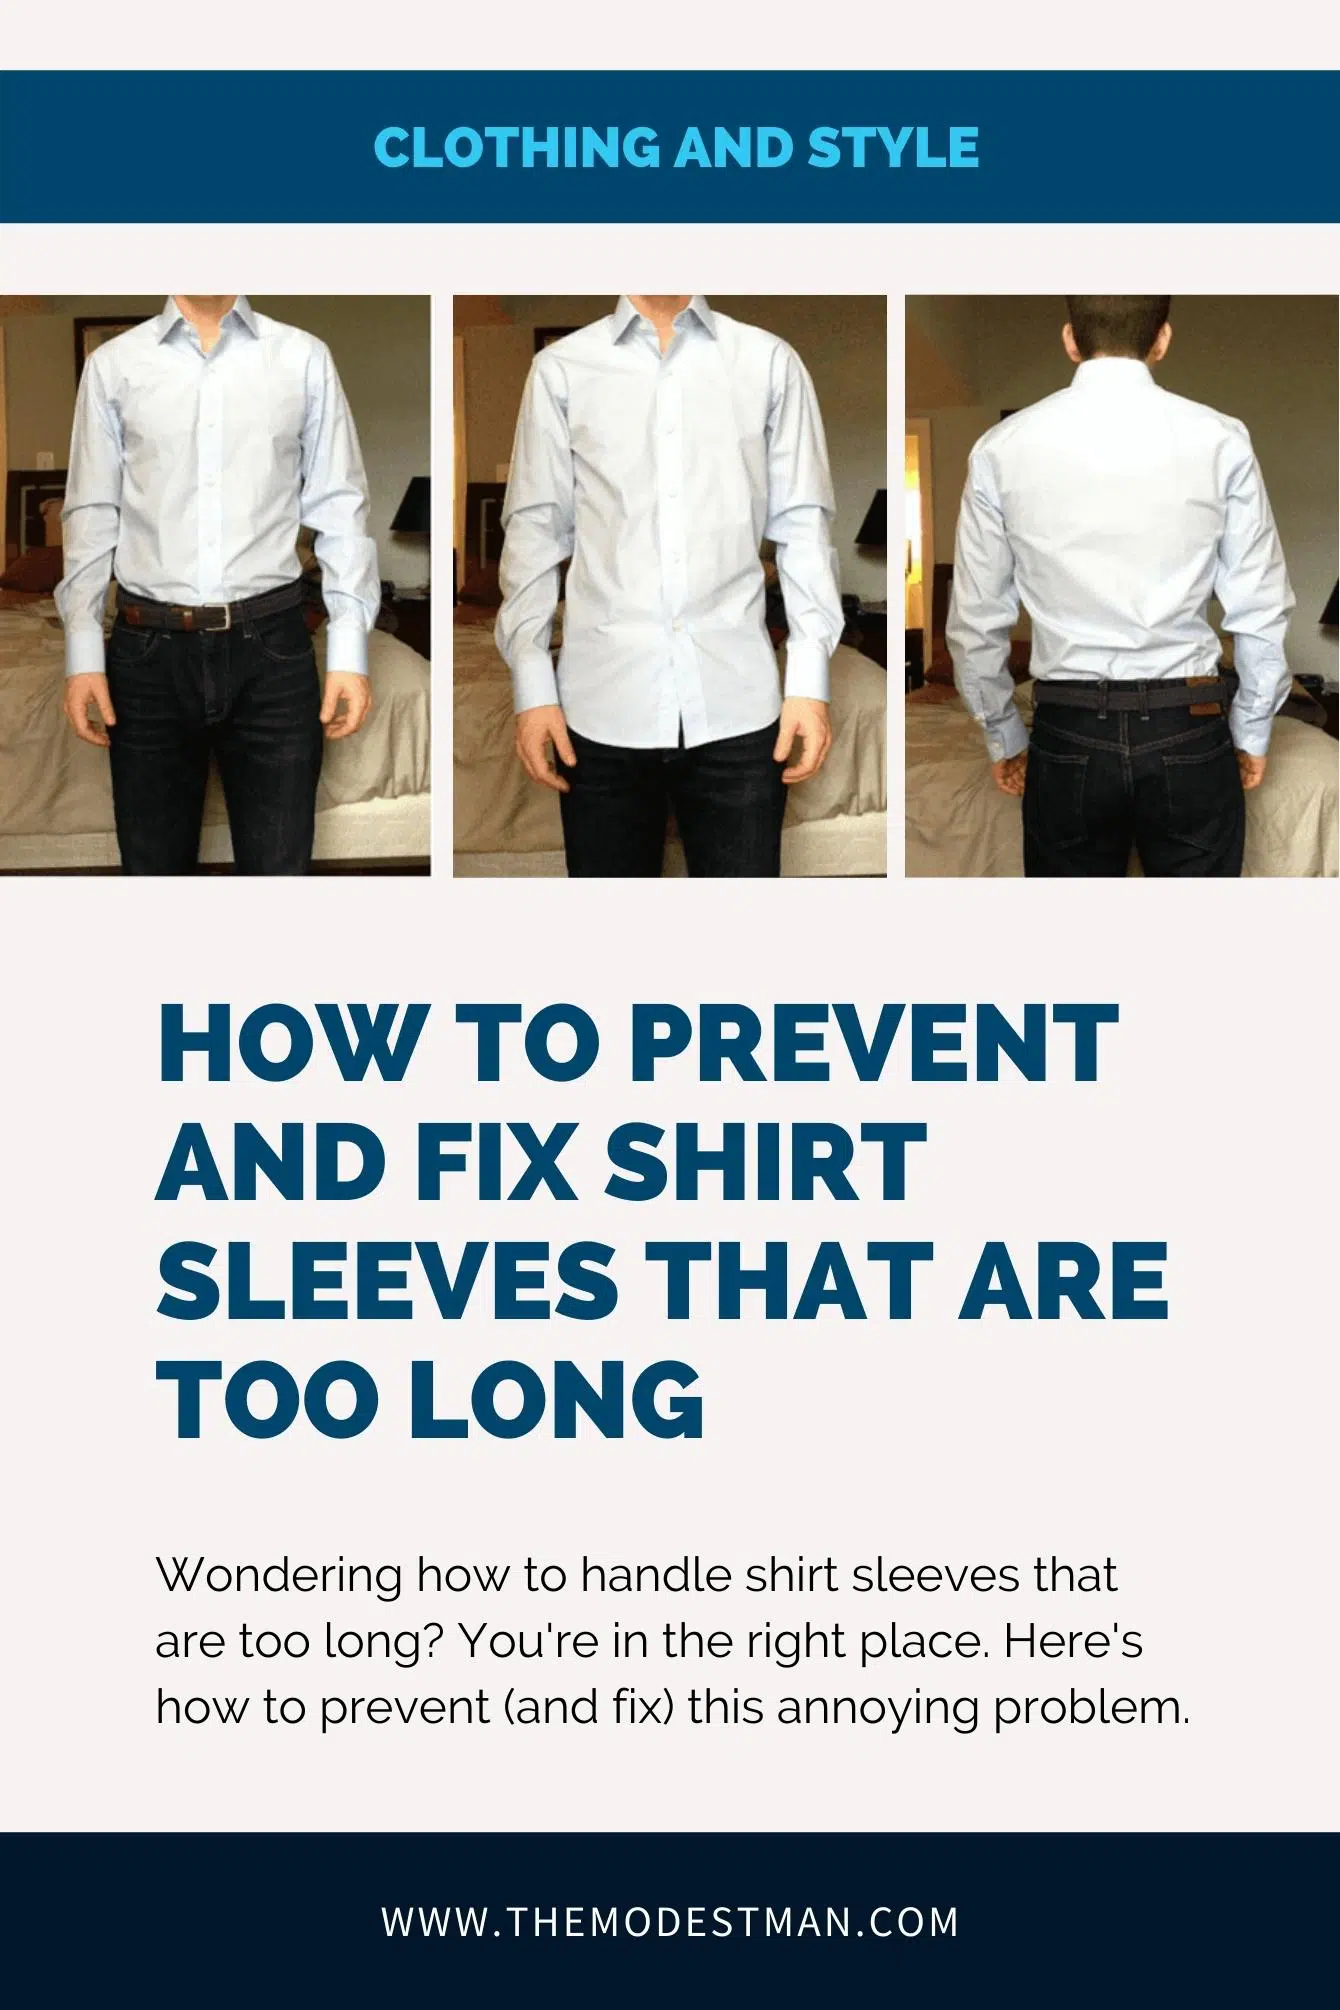 How to Handle Shirt Sleevs That Are Too Long